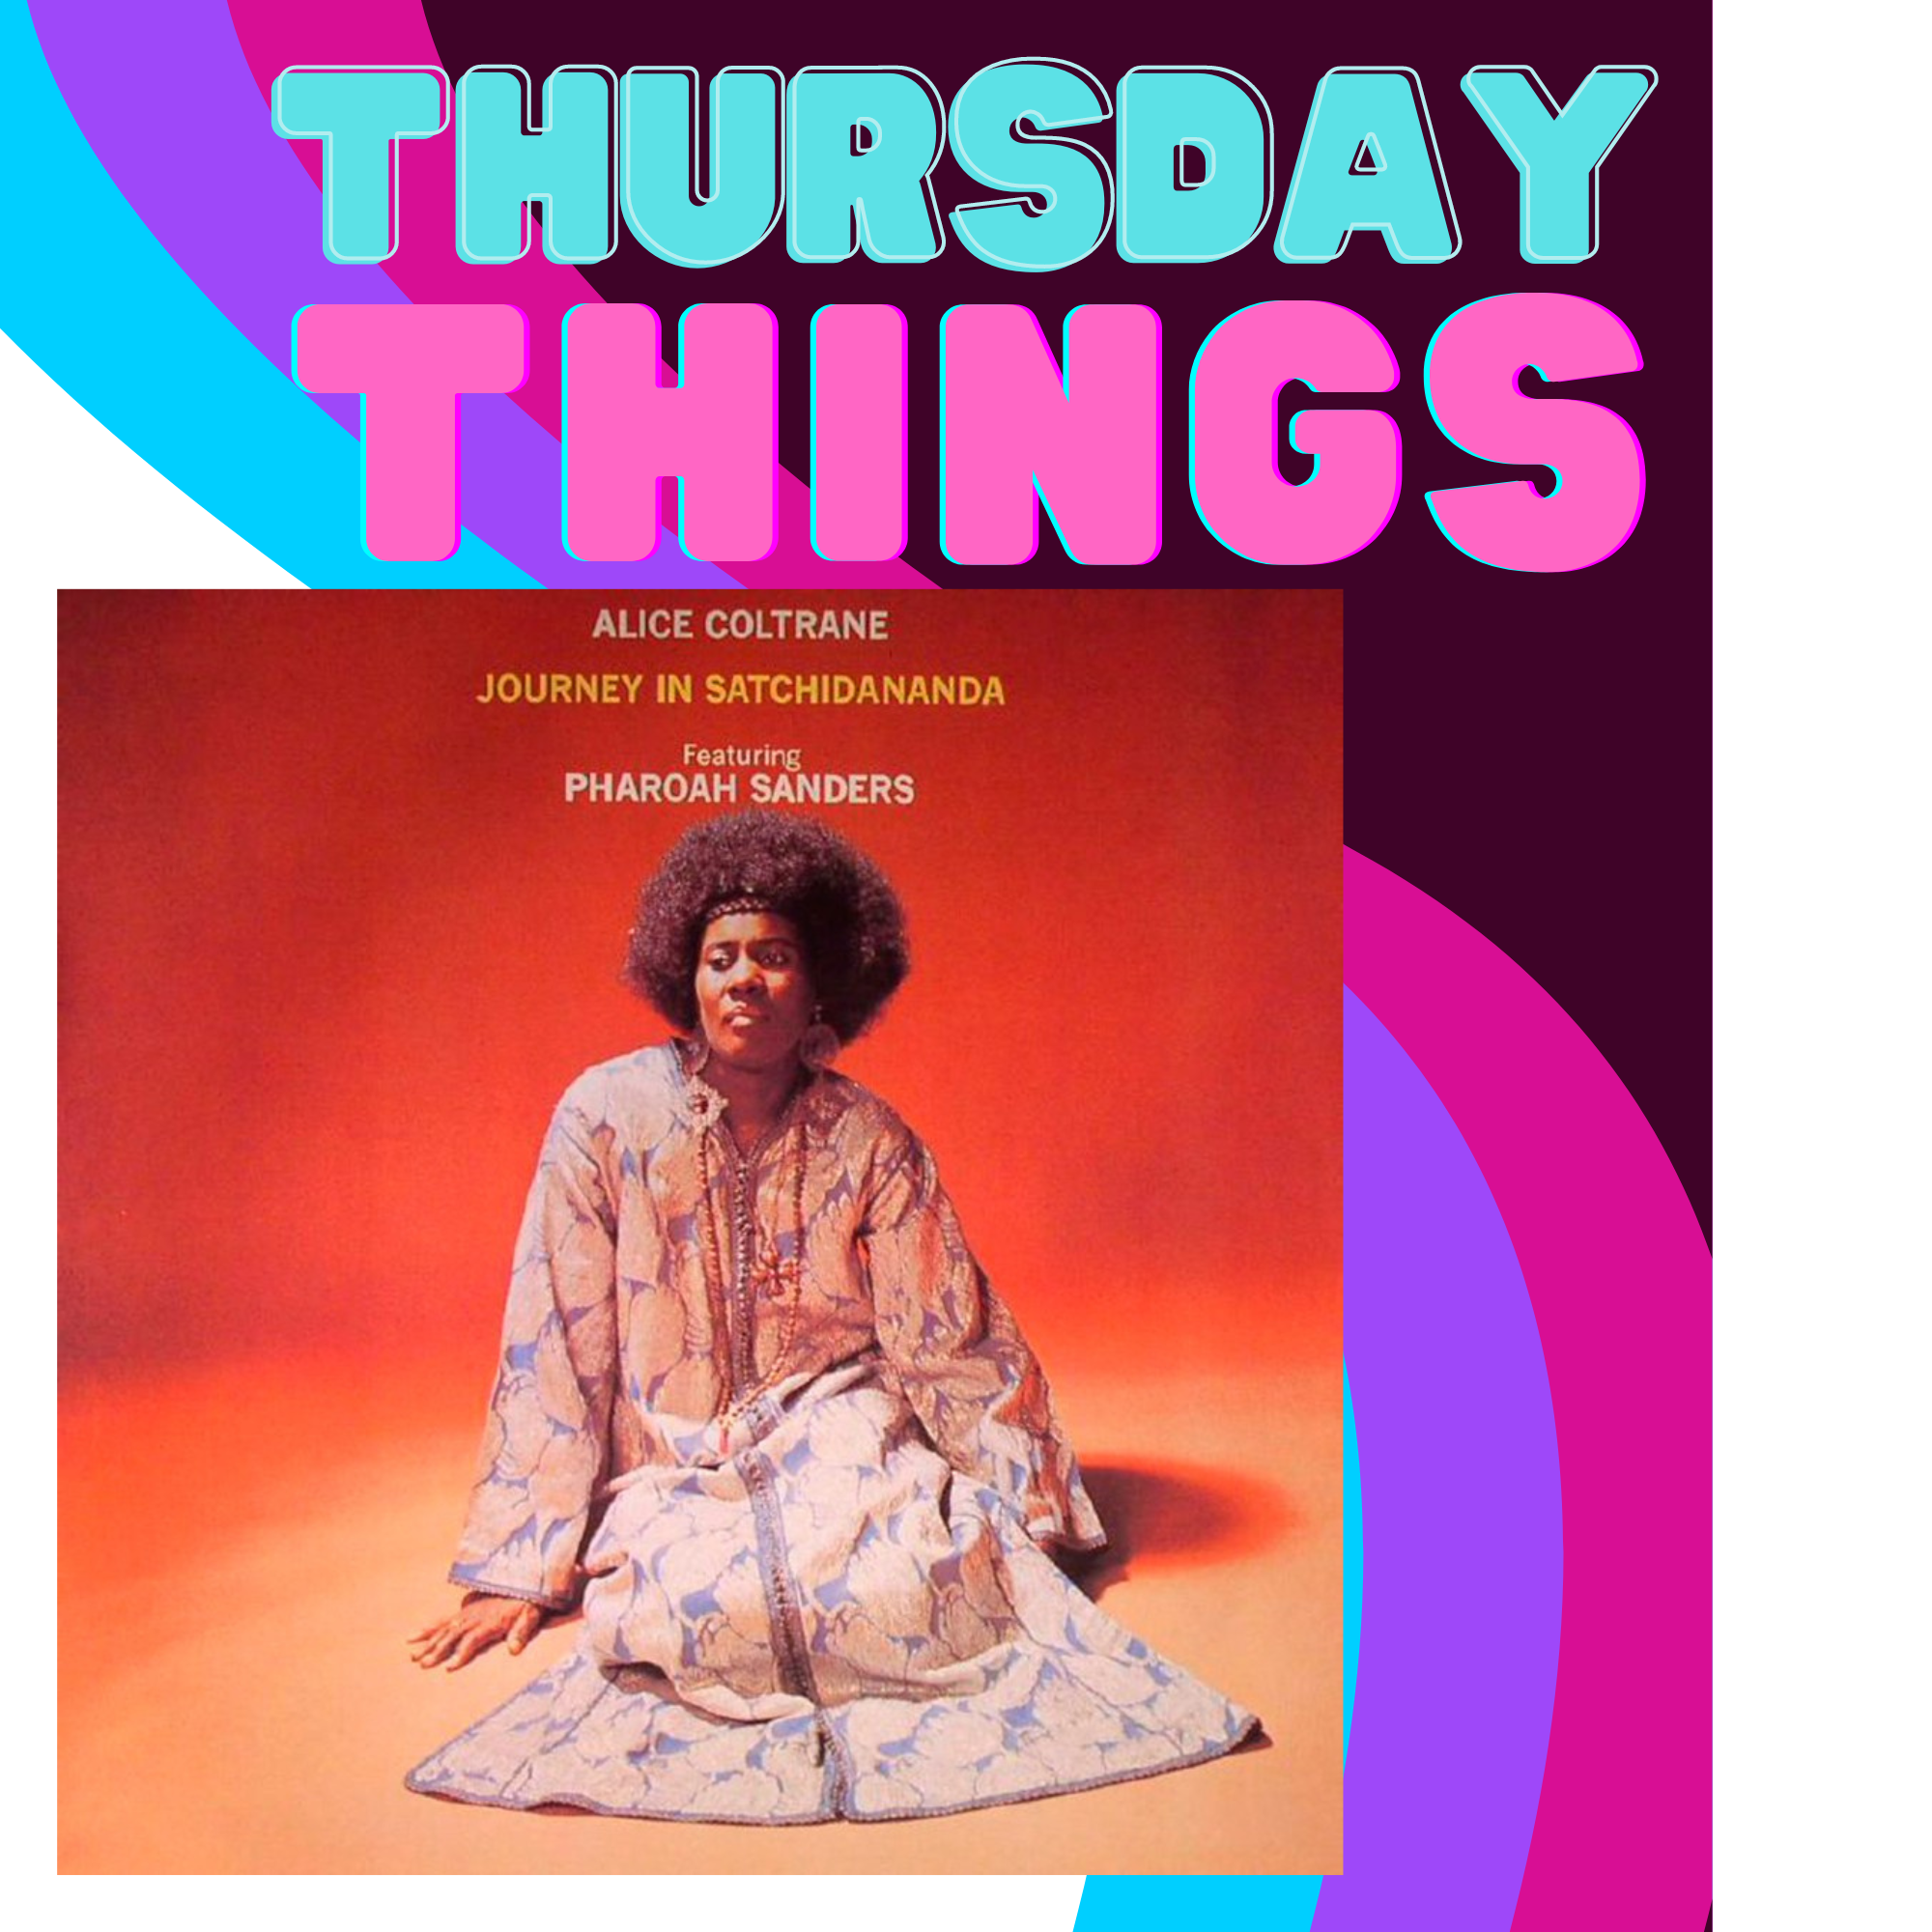 Thursday Things Alice Coltrain